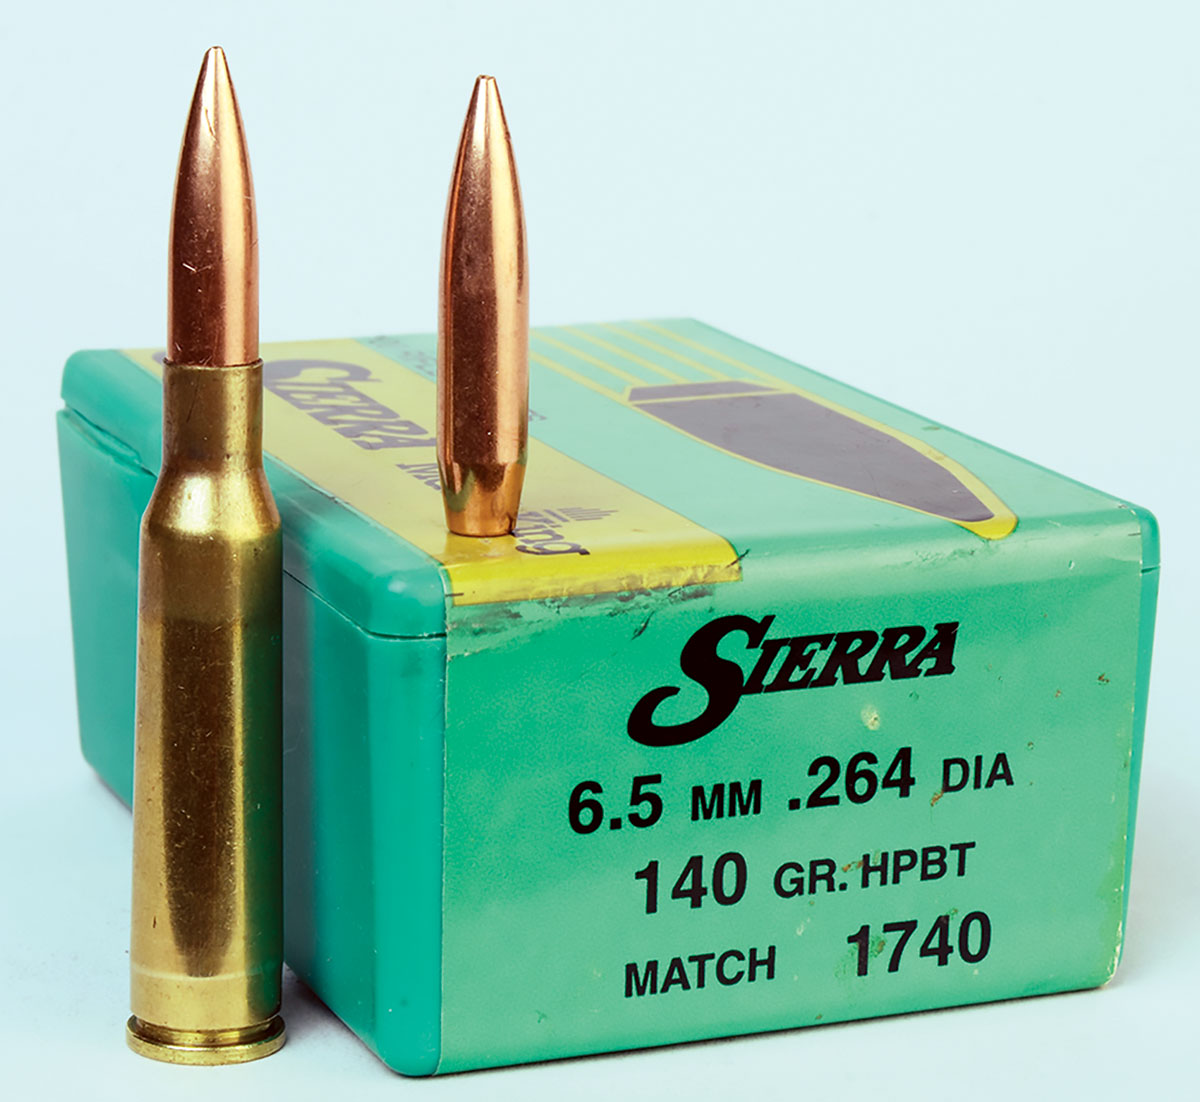 For this article, Mike shot his Type 97 6.5mm with Sierra 140-grain HPBT bullets.